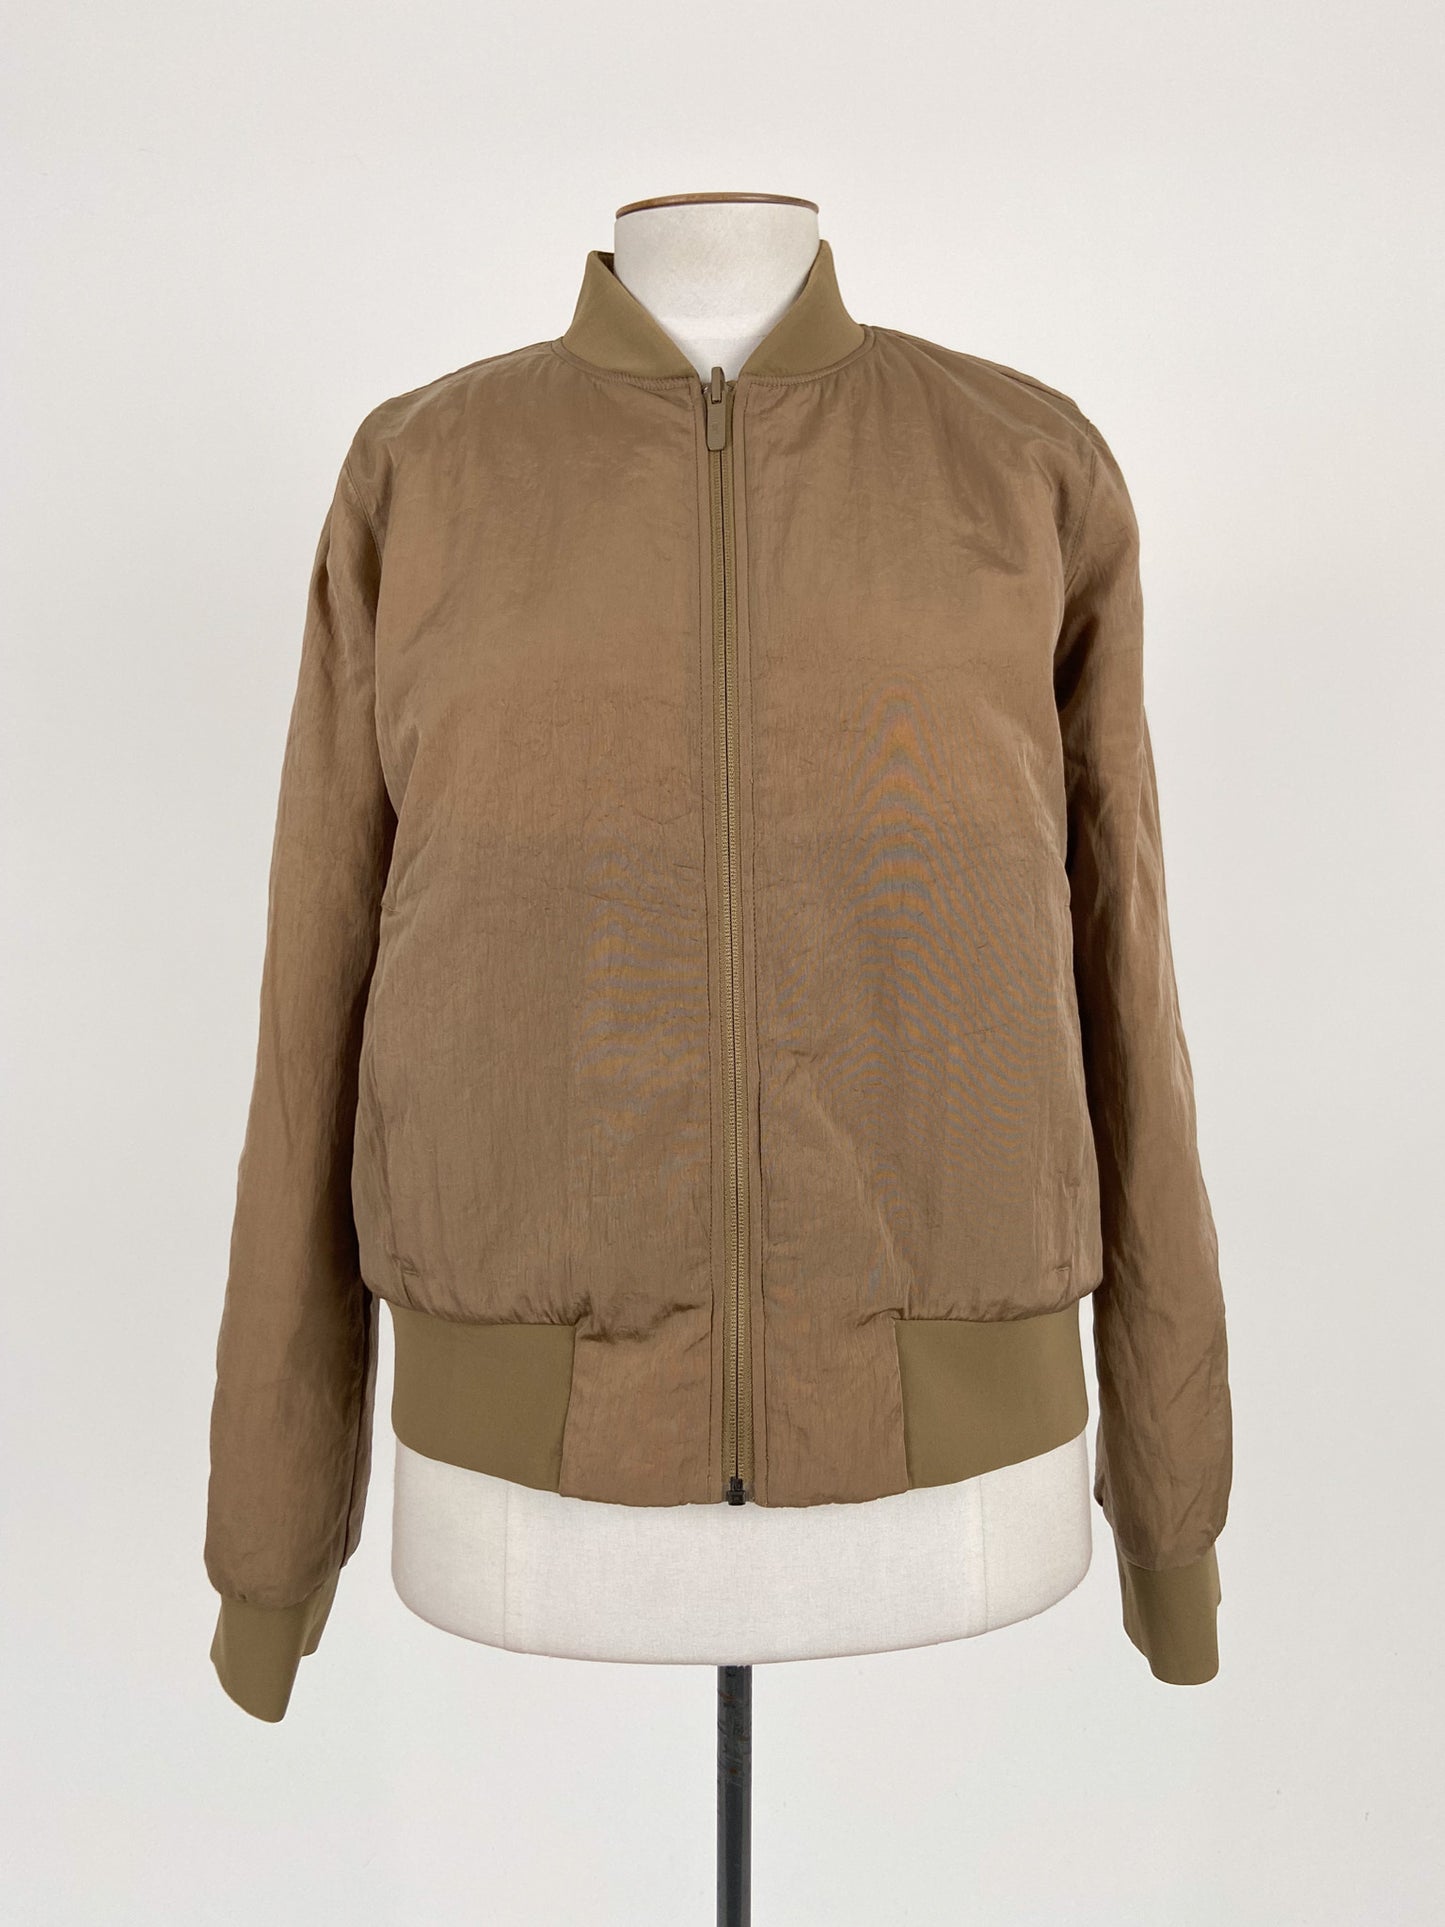 Unknown Brand | Brown Casual Jacket | Size M